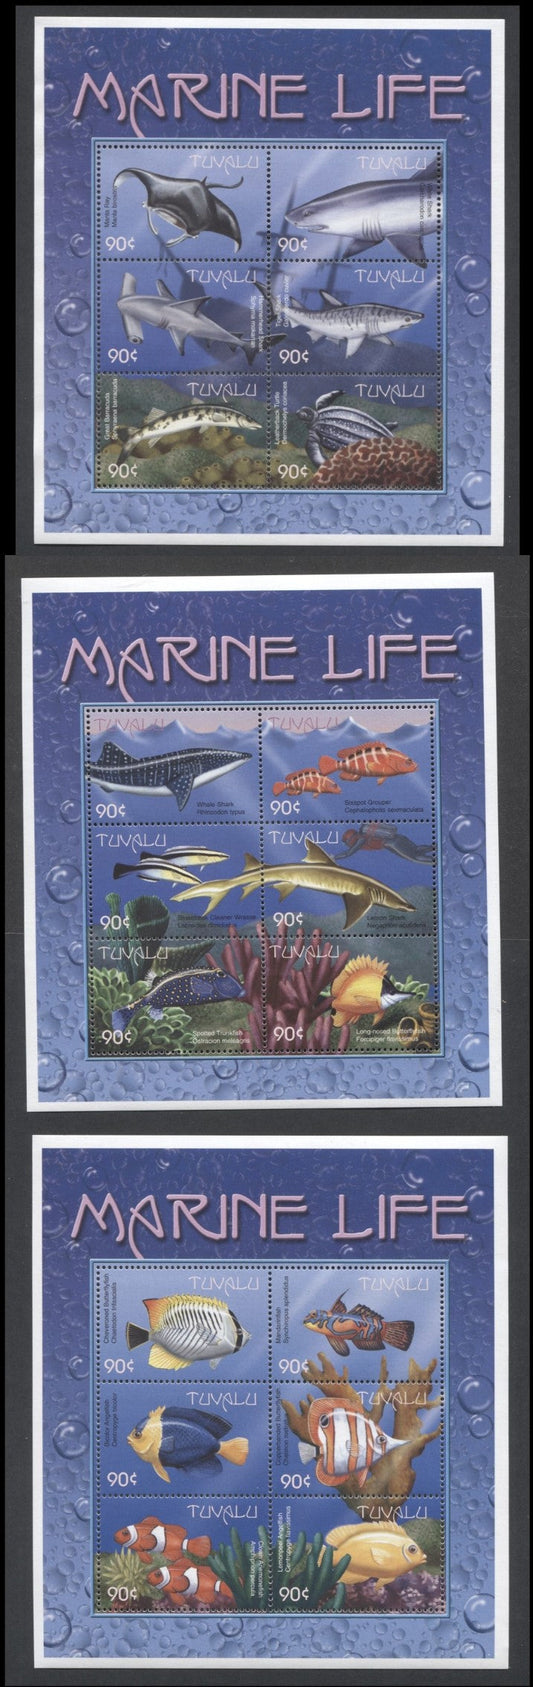 Lot 67 Tuvalu SC#821-823 2000 Marine Life & Birds Issues, 3 VFNH Souvenir Sheets, Click on Listing to See ALL Pictures, 2017 Scott Cat. $22.5